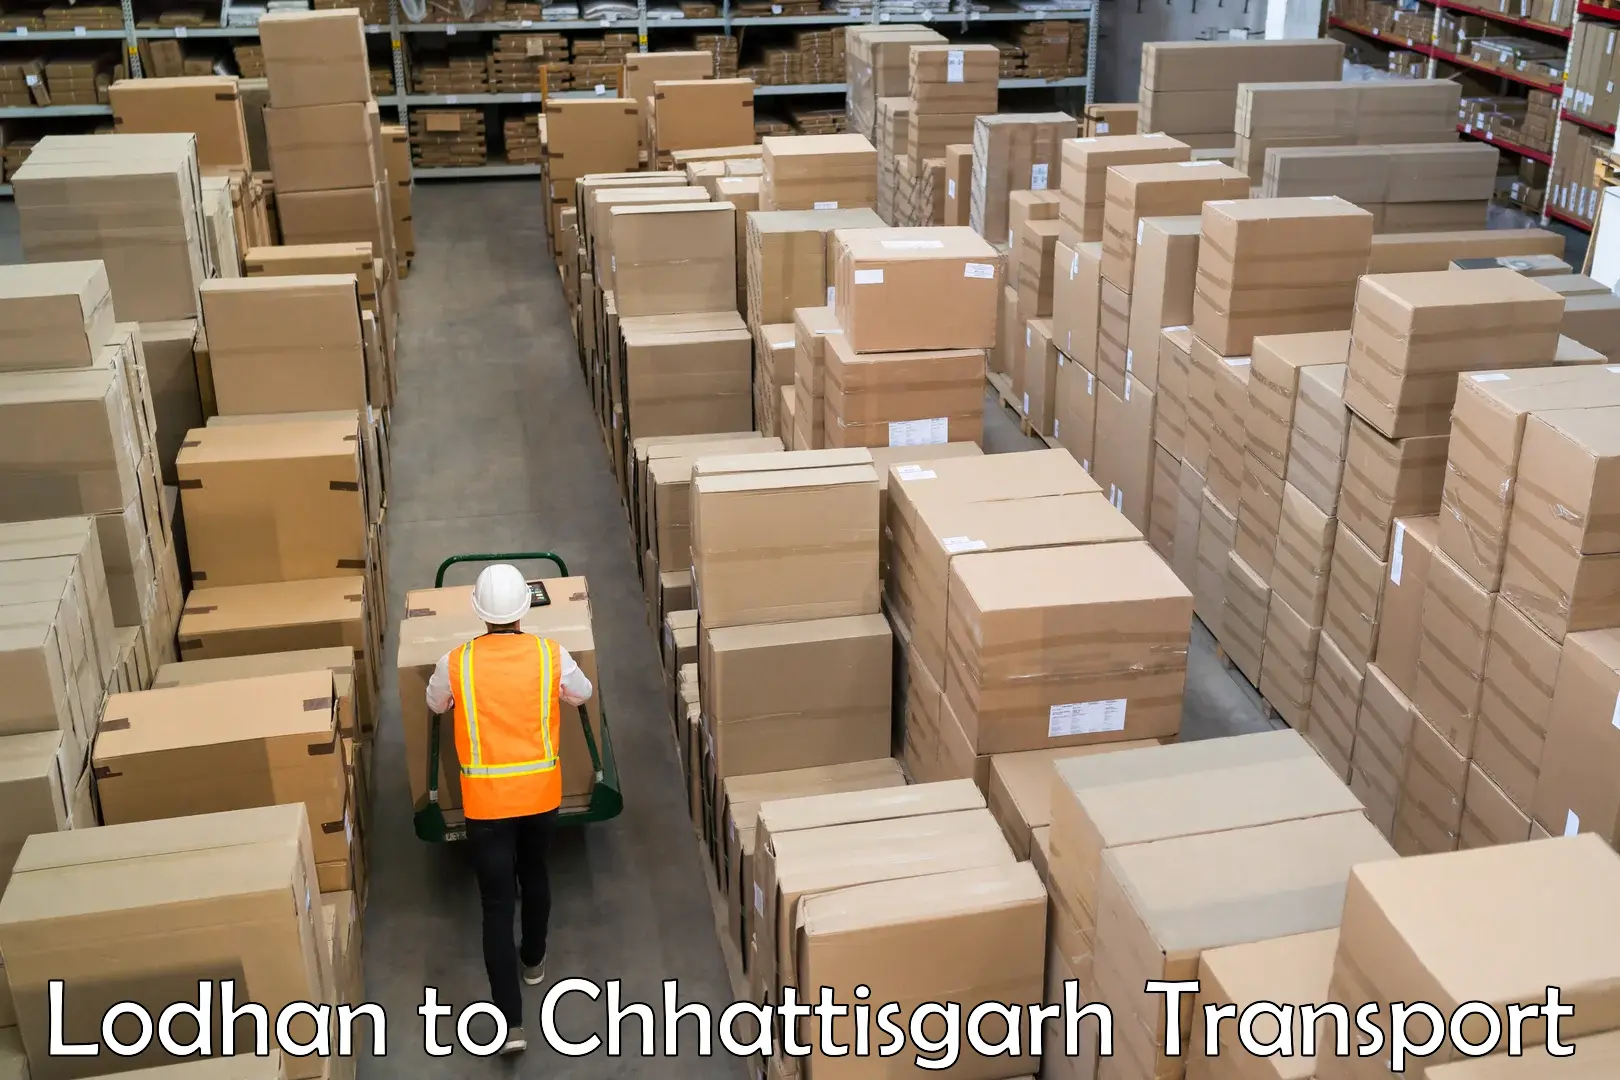 Goods delivery service Lodhan to Chhattisgarh